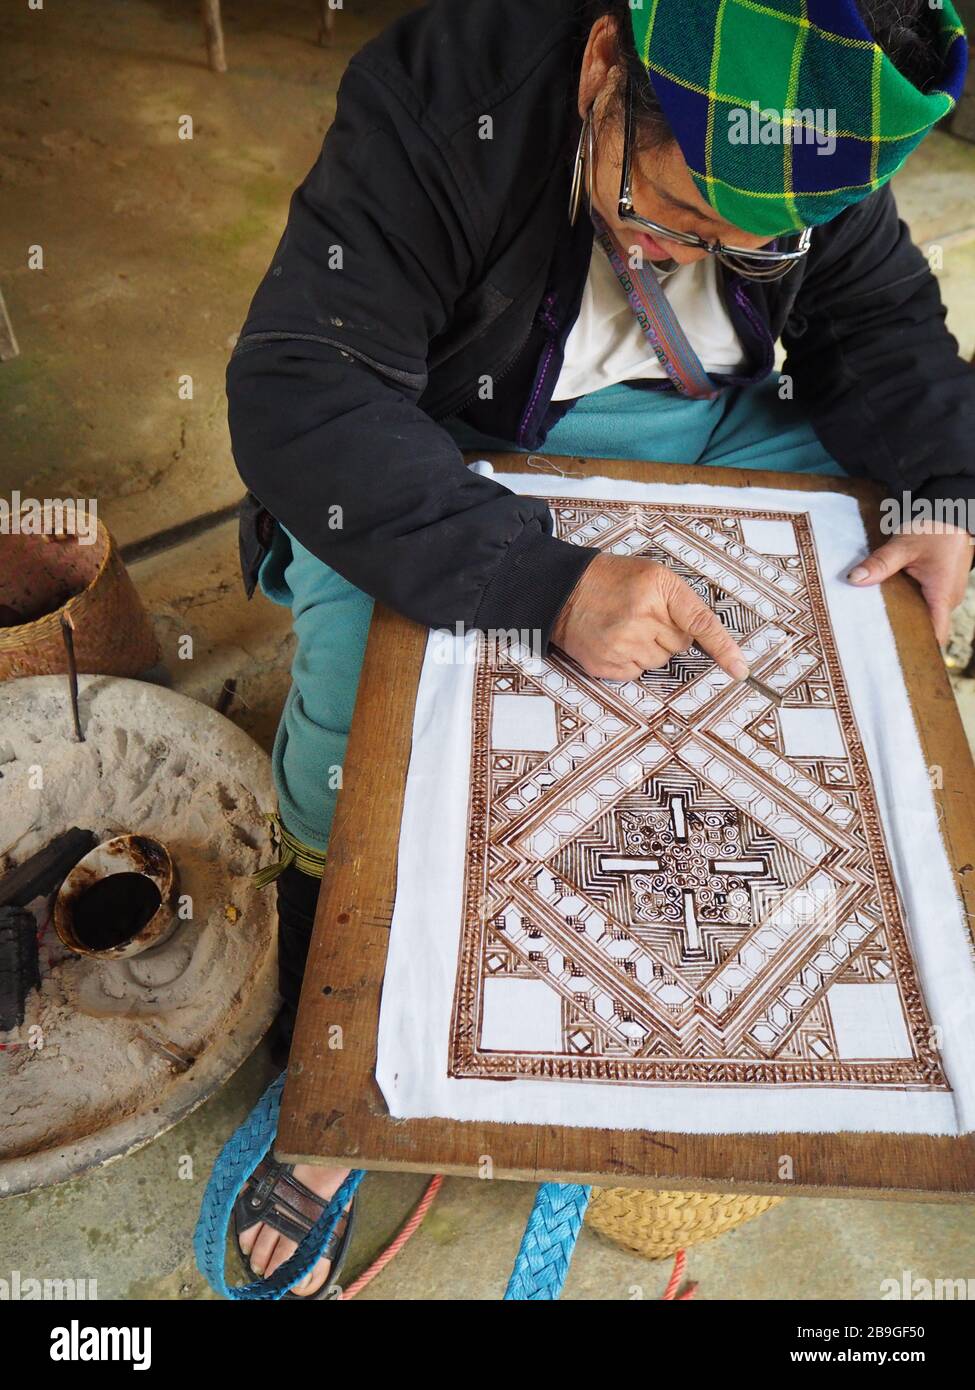 A Hmong woman using traditional patterns to paint on fabric in Sapa, Vietnam which she will then make into bags and other handicrafts Stock Photo